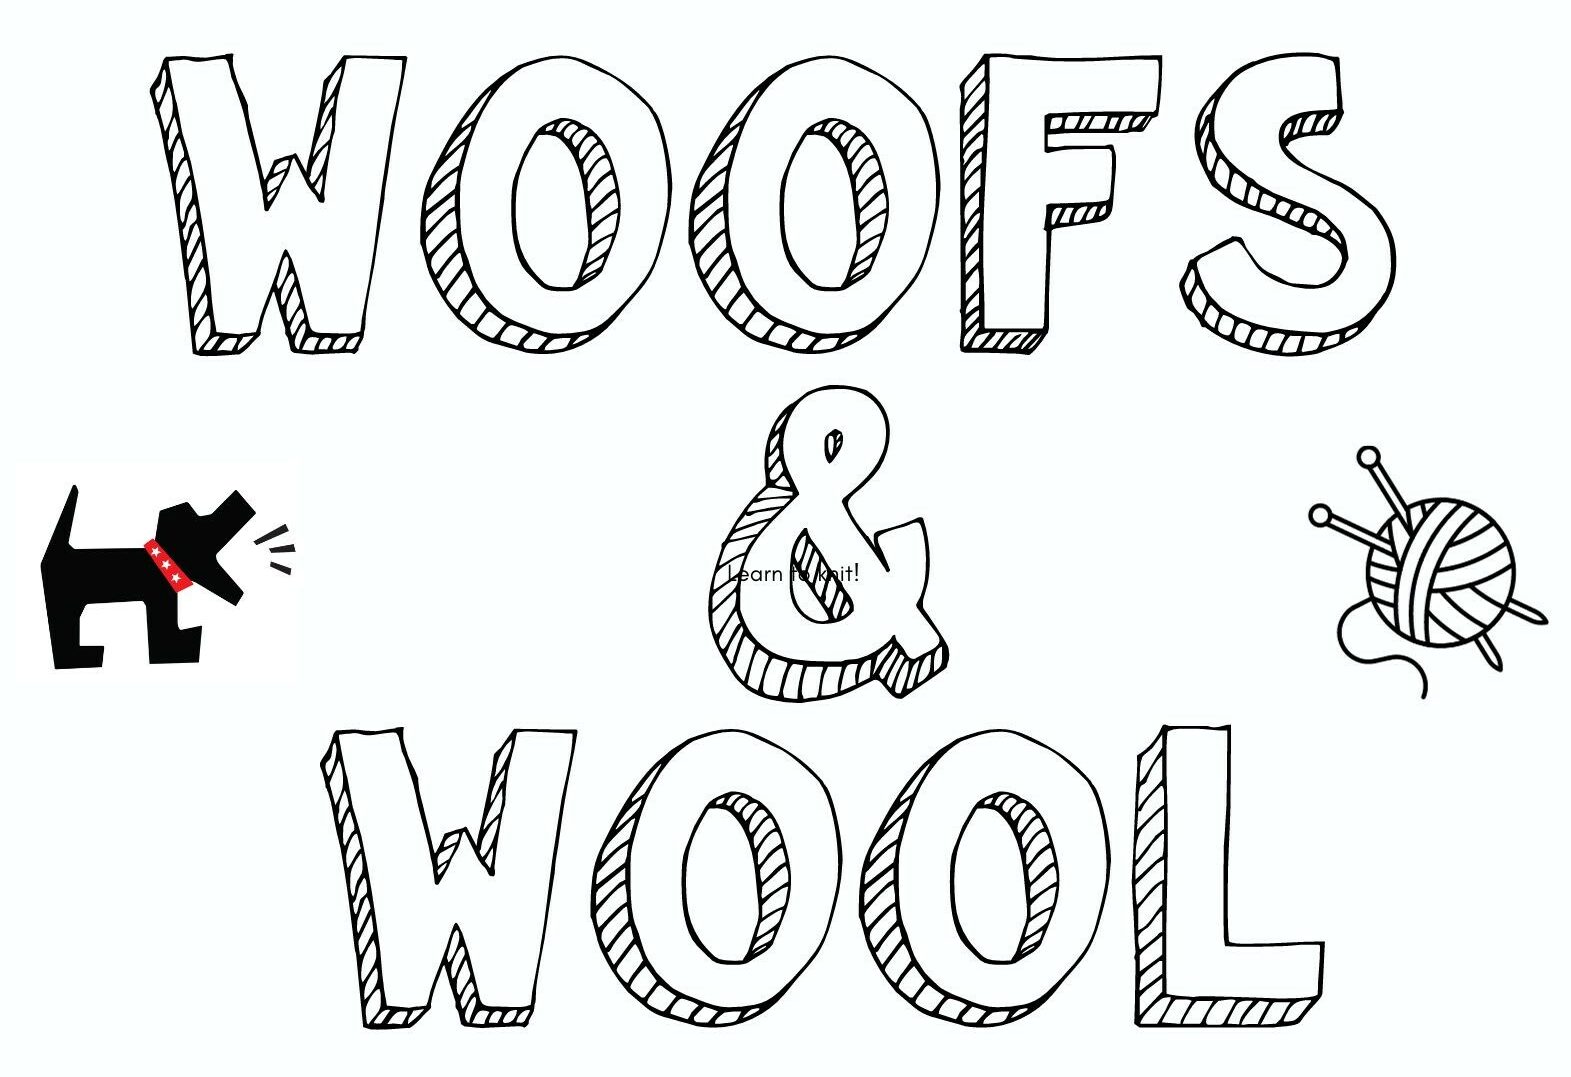 Partnership: Woofs and Wool at Creature Clothes